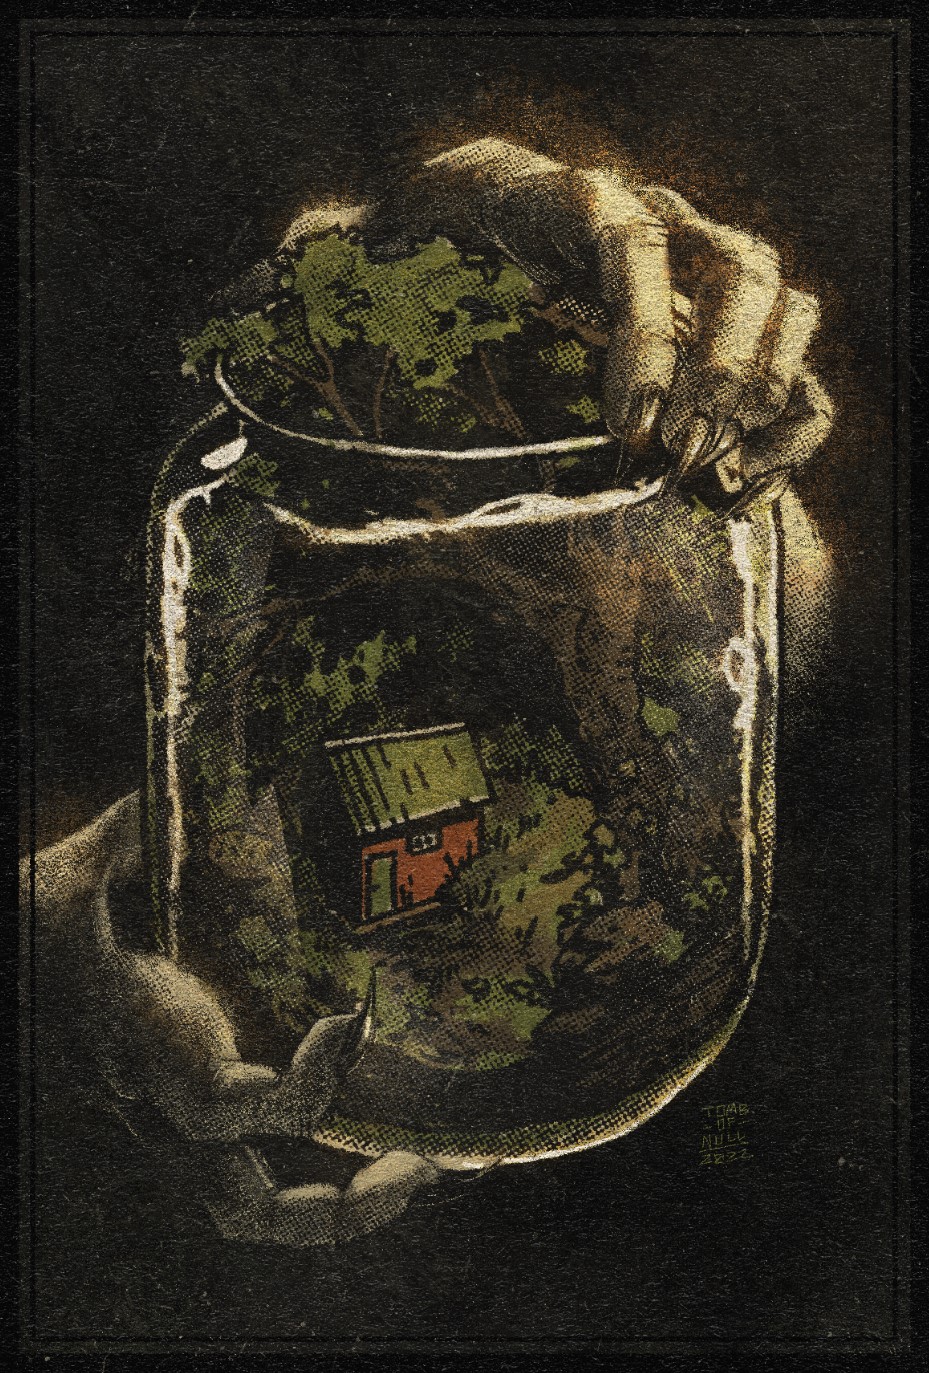 An illustraion of a jar held by the hands of a creature. Within the jar is a lush forest and a small red-orange house.